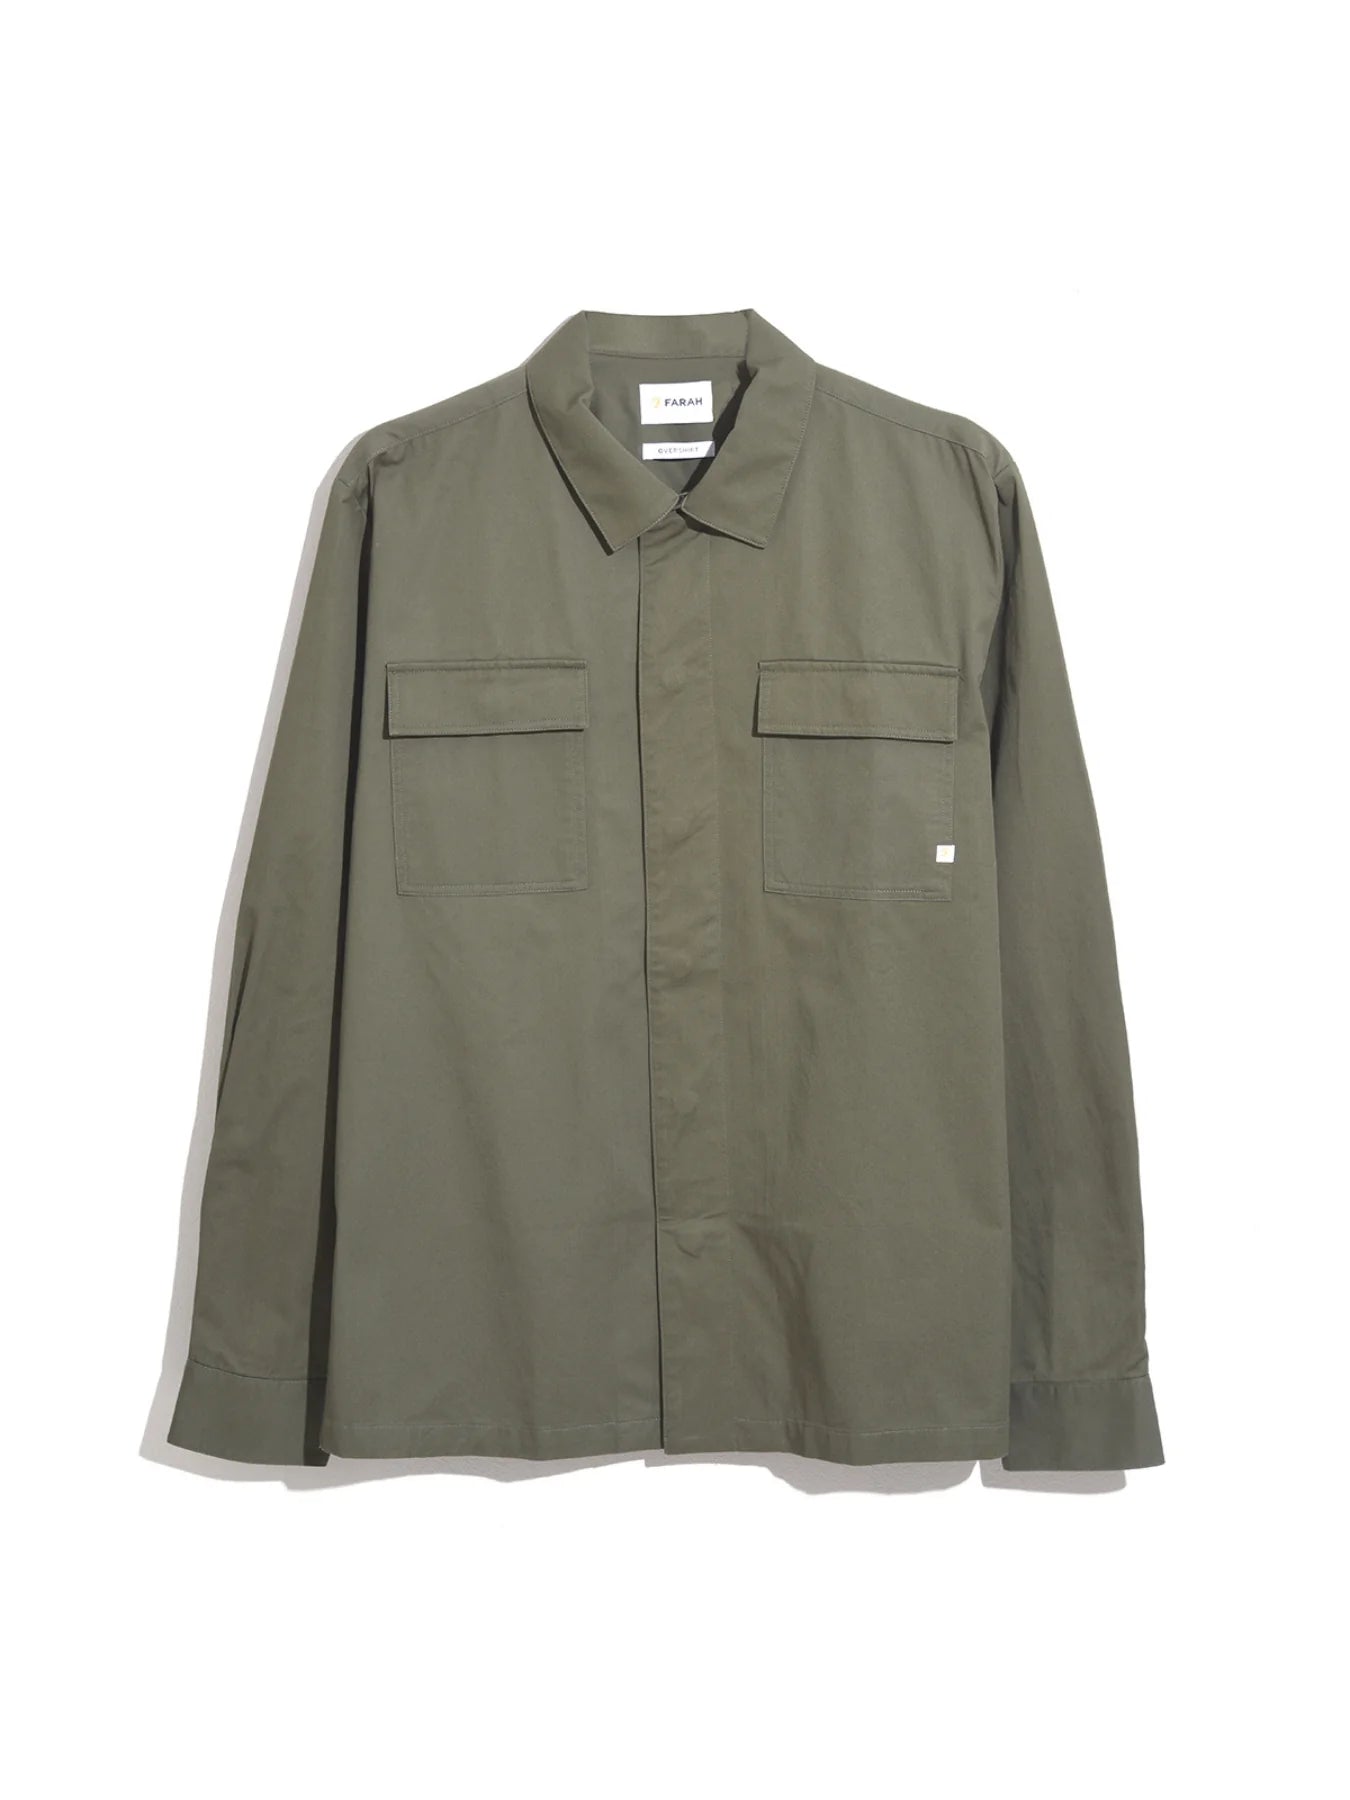 Farah Kelly Relaxed Fit Shirt / Vintage Green